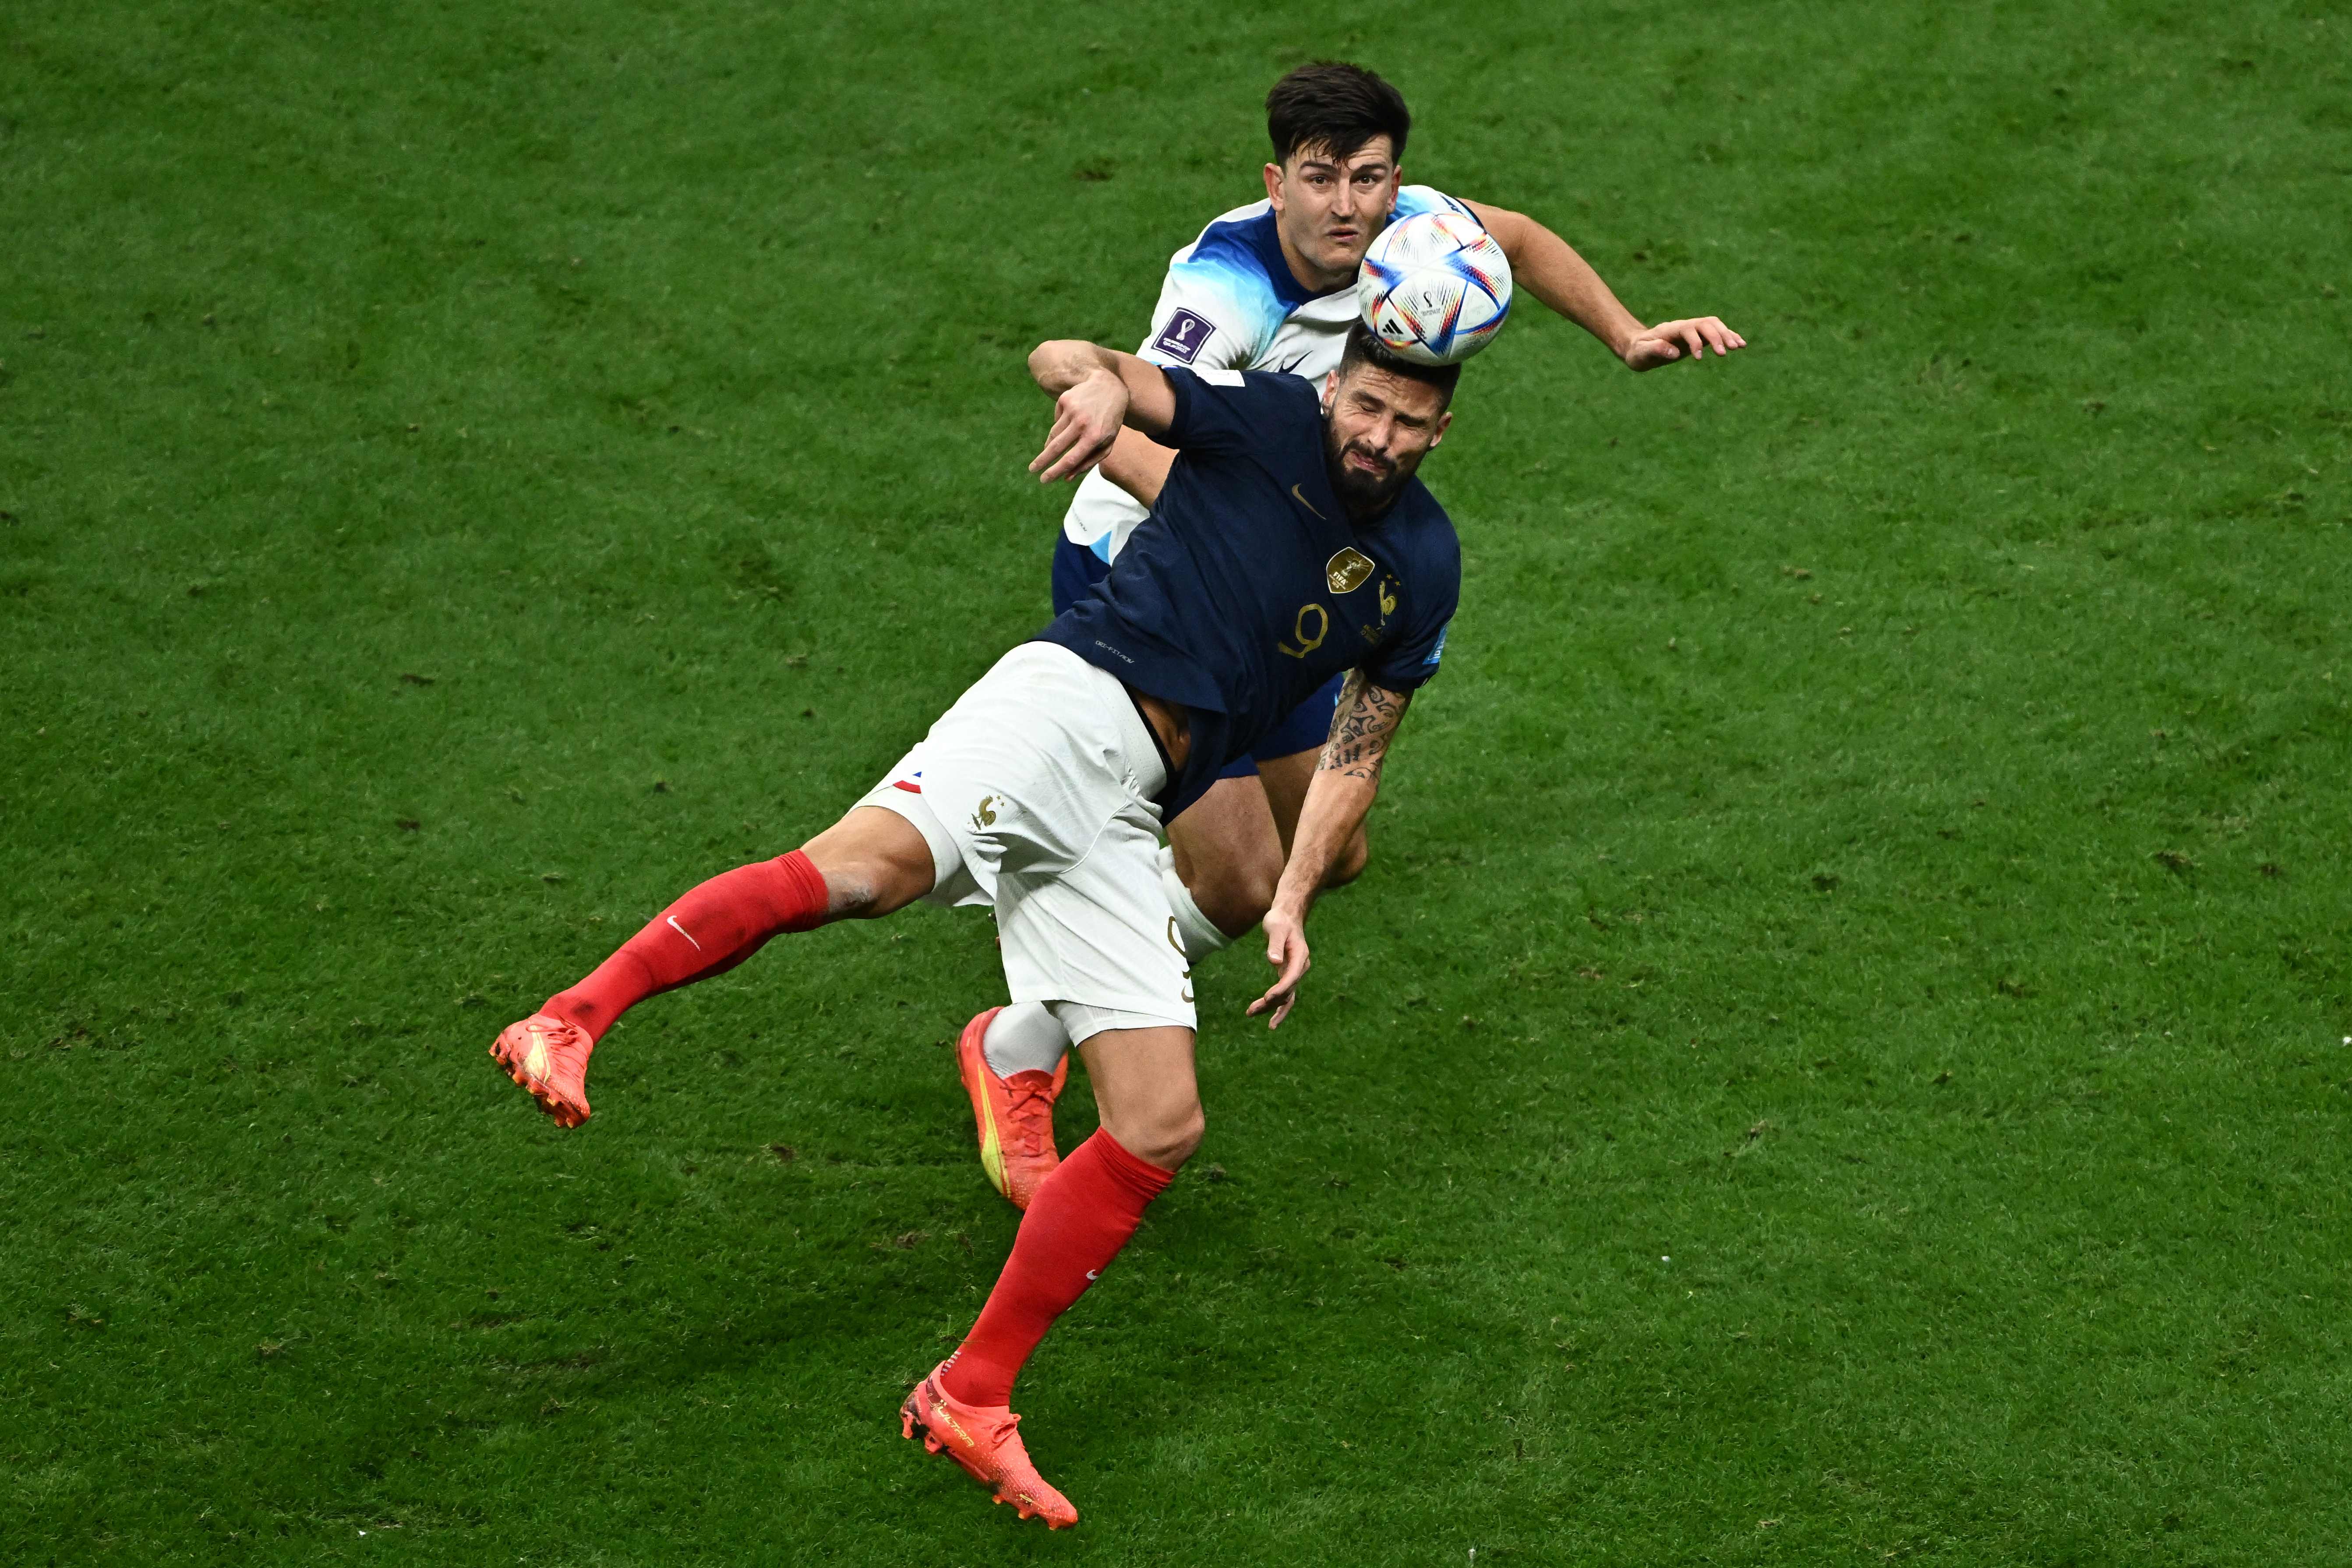 Olivier Giroud heads the ball as he is marked by England's defender